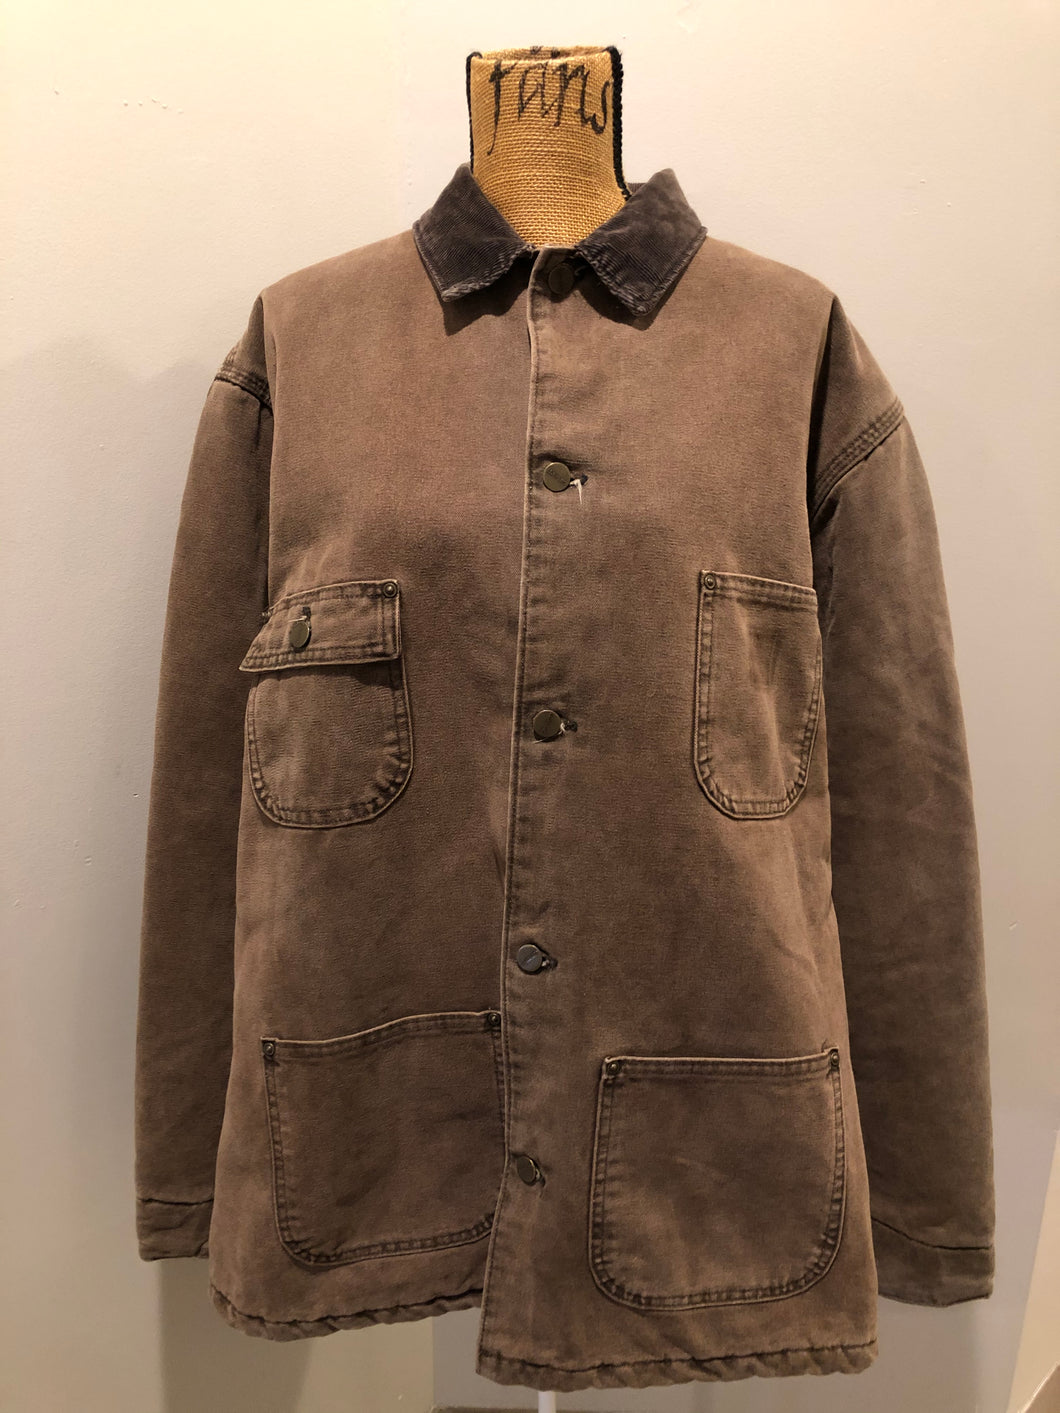 Kingspier Vintage - Carhartt brown chore jacket with brown corduroy collar, button closures, four patch pockets and a felted wool inside lining. Size XL